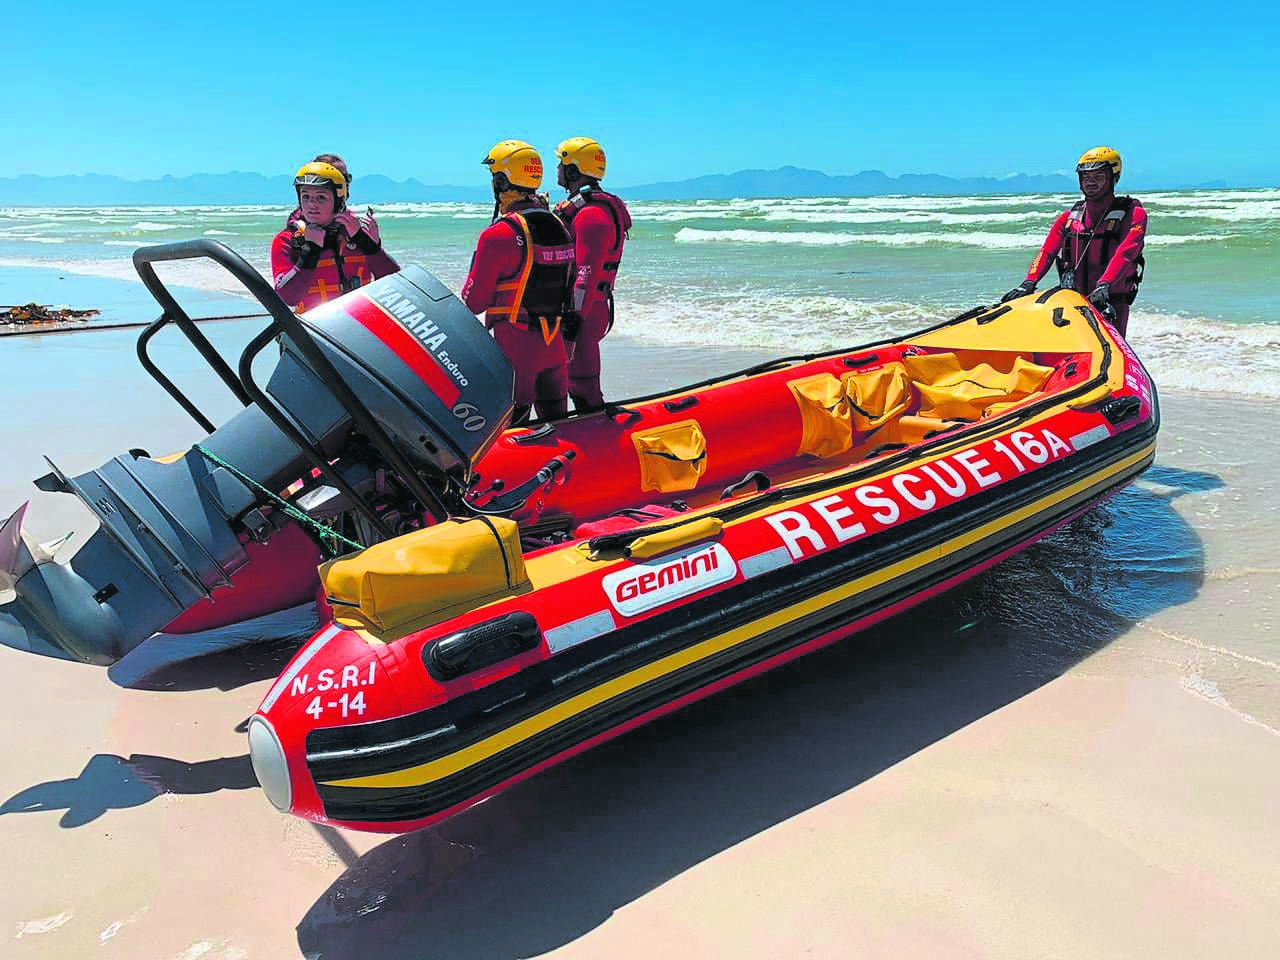 The NSRI responded to two drowning incidents on Saturday, in Hermanus and Wilderness.